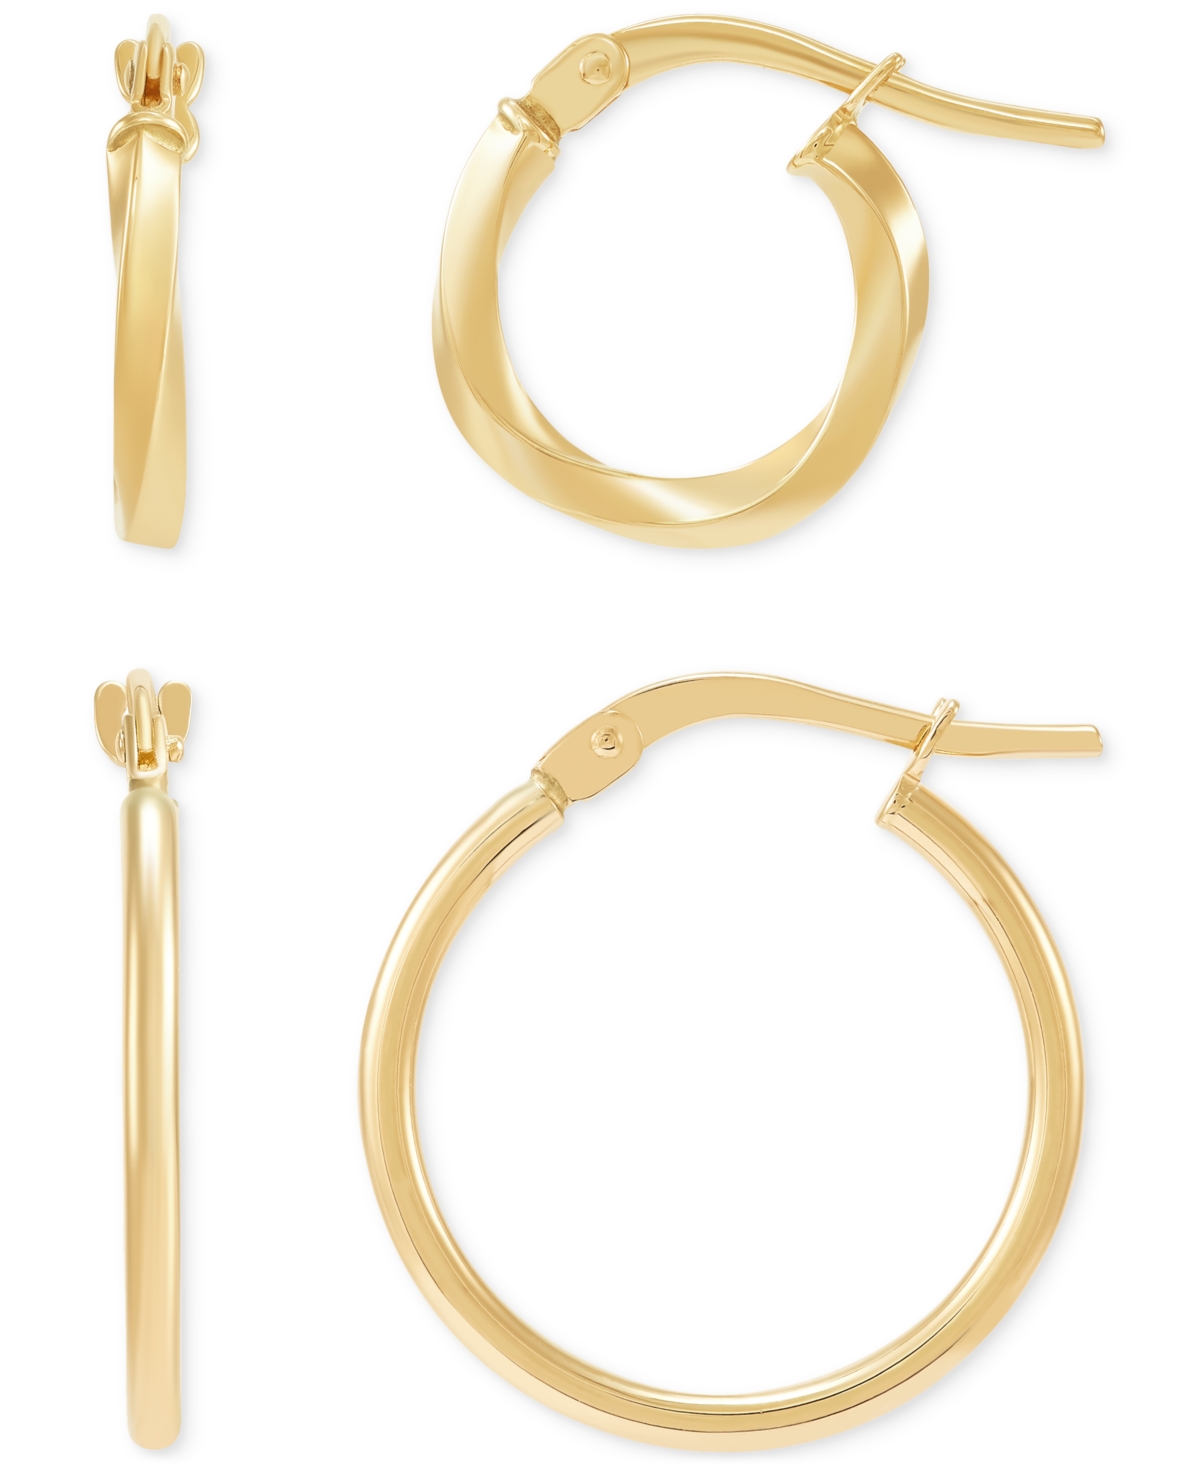 2-Pc. Set Polished & Twist Style Small Hoop Earrings in 10k Gold - Yellow Gold